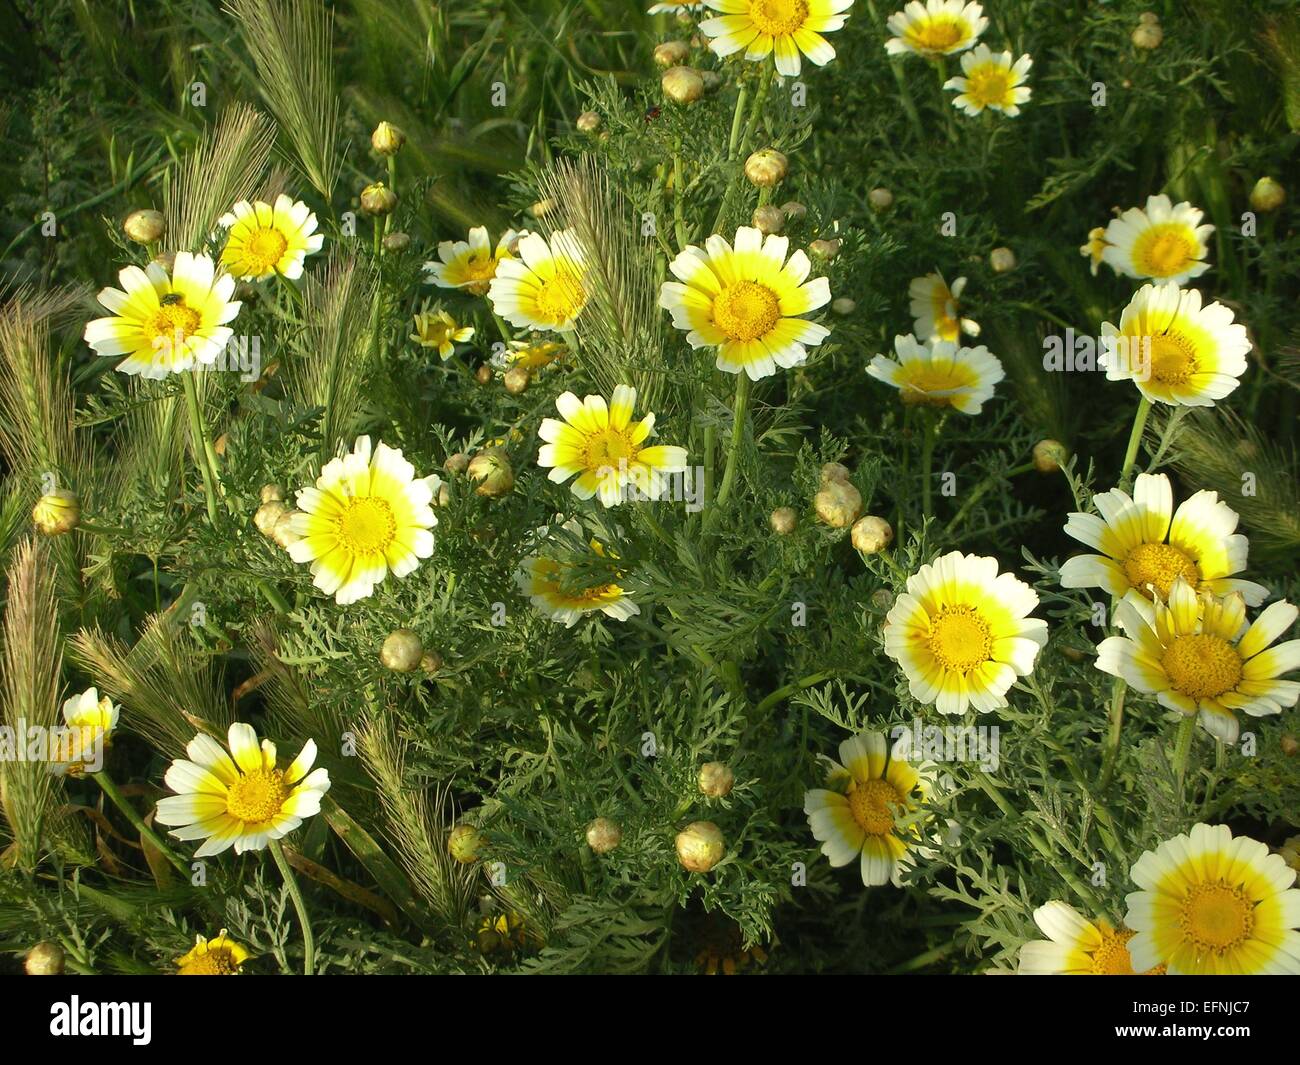 Meadowfoam or Limnanthes Douglasii Flowers Stock Photo